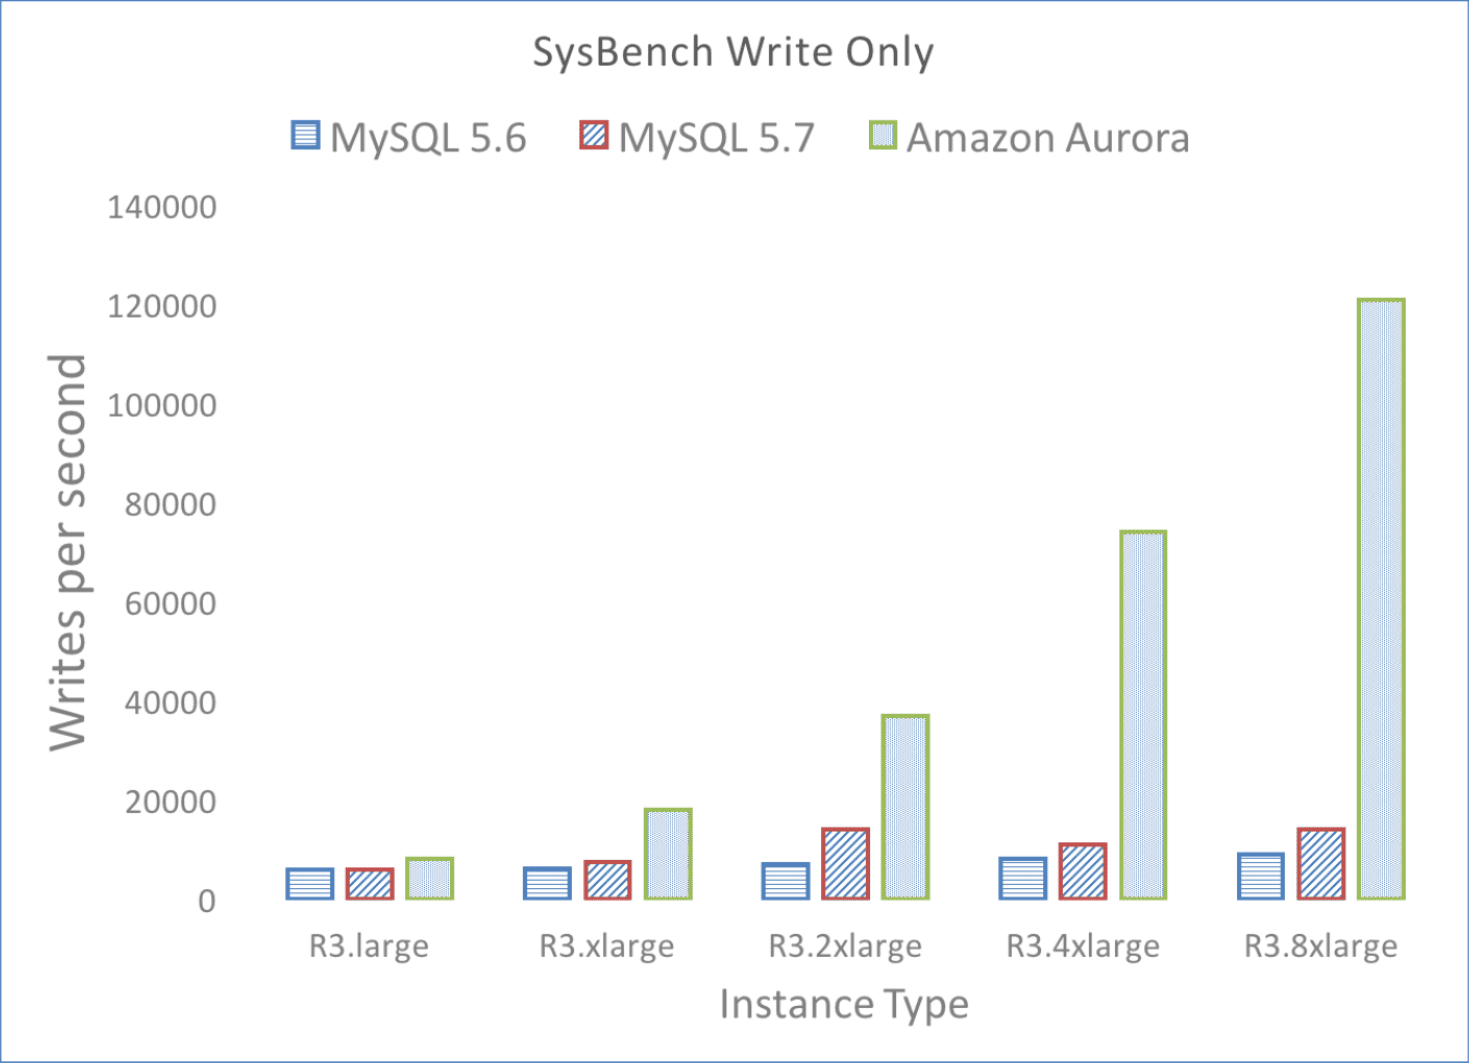 2008-sysbench-write-only.png